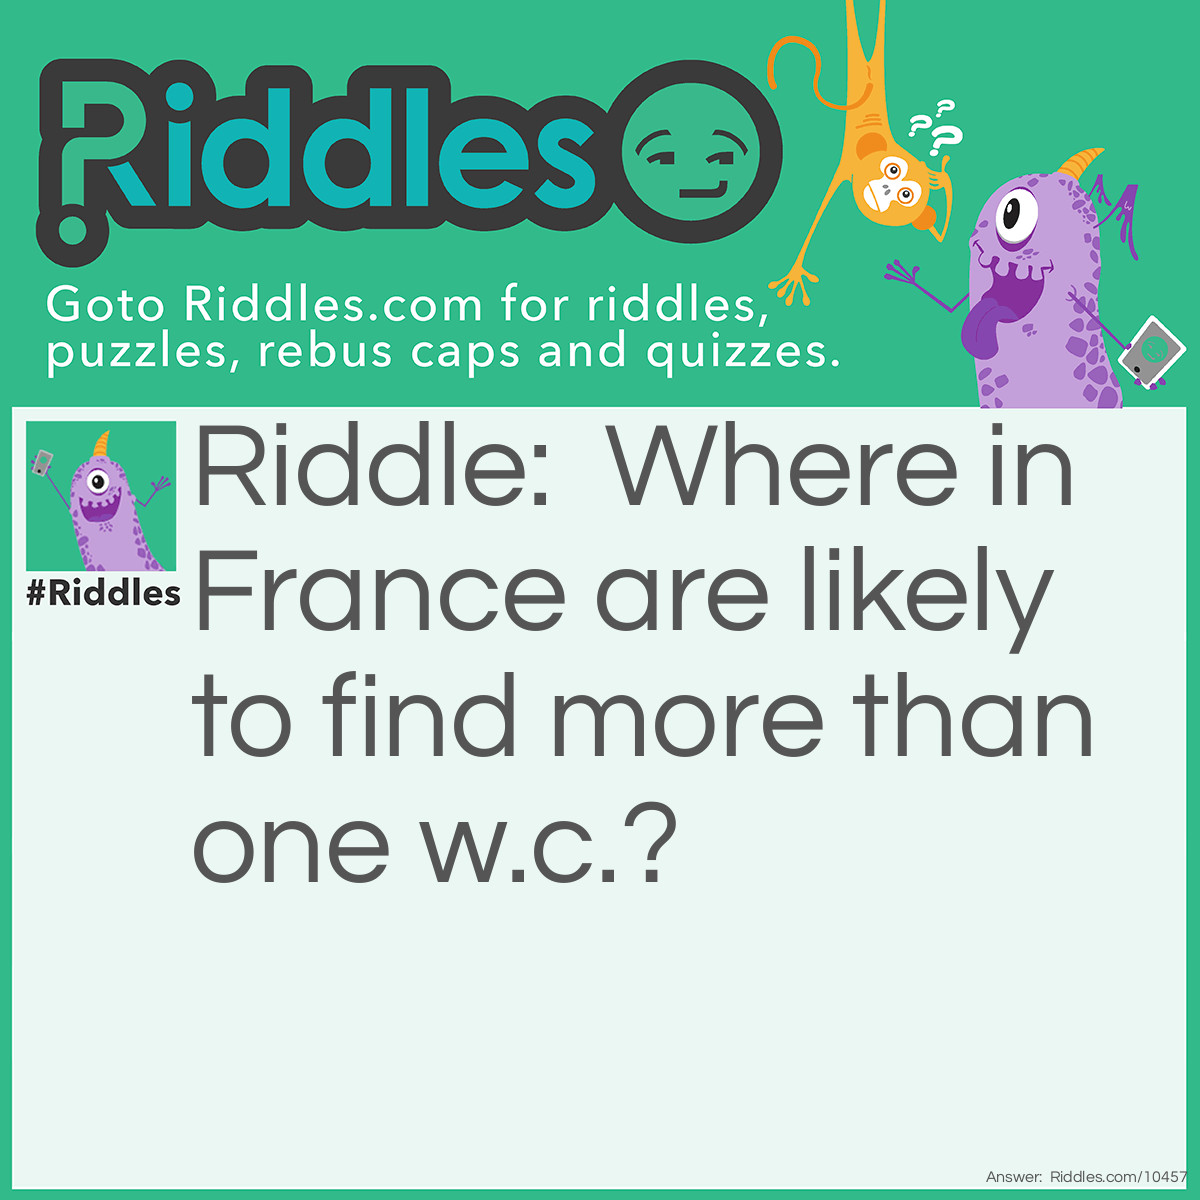 Riddle: Where in France are likely to find more than one w.c.? Answer: Two loos (Toulouse).